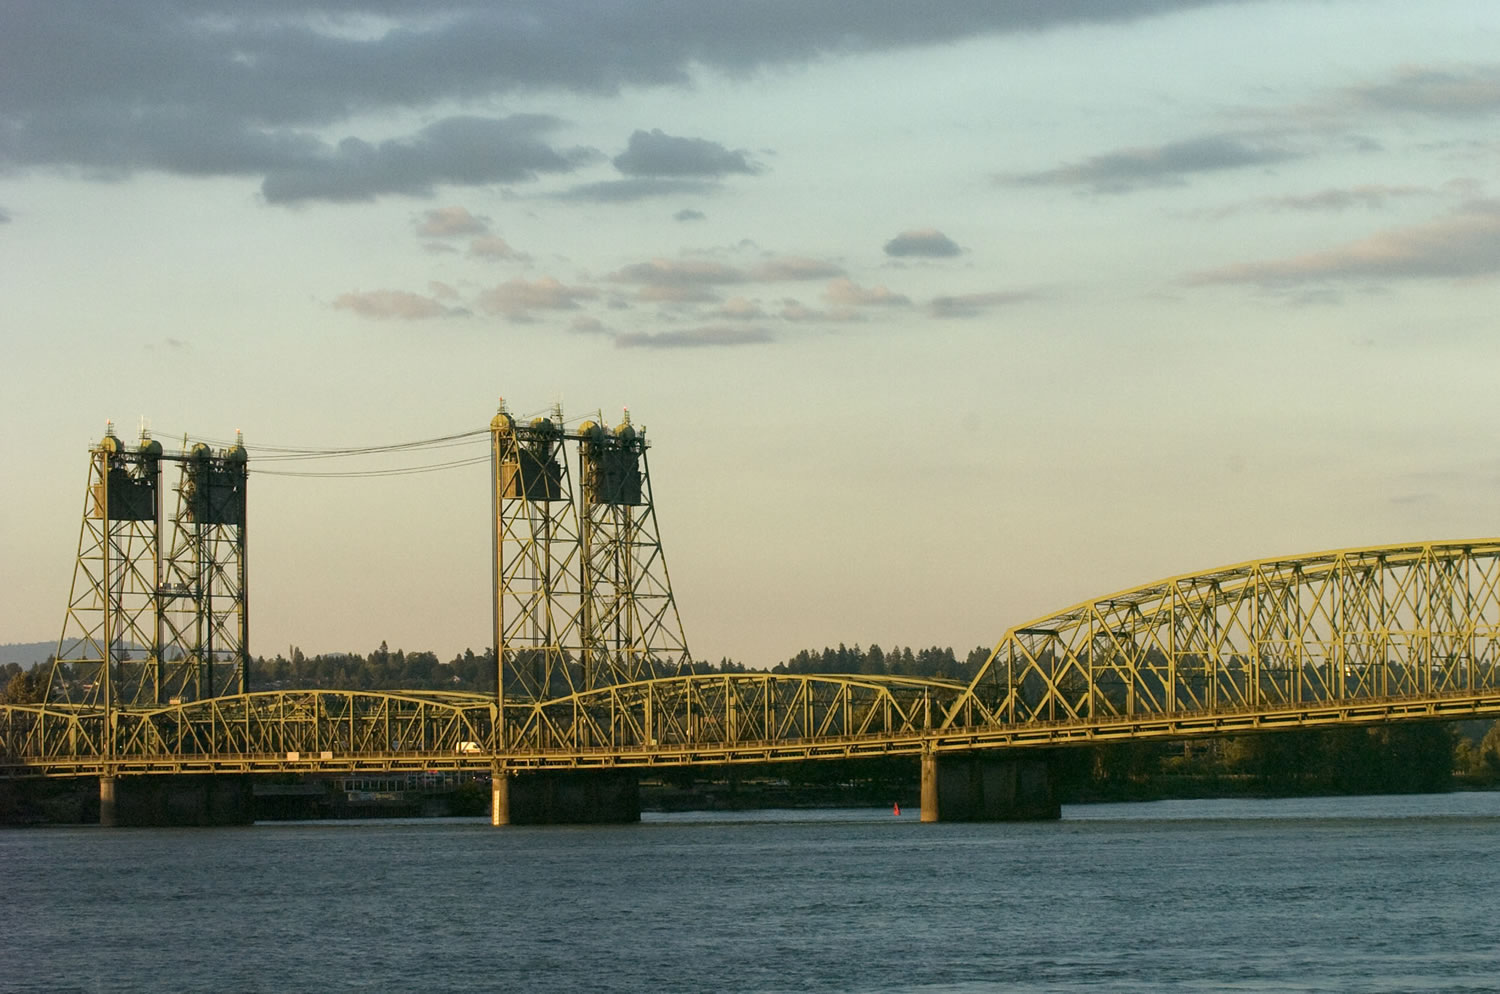 The Interstate 5 Bridge from the Hayden Island mobile home park.